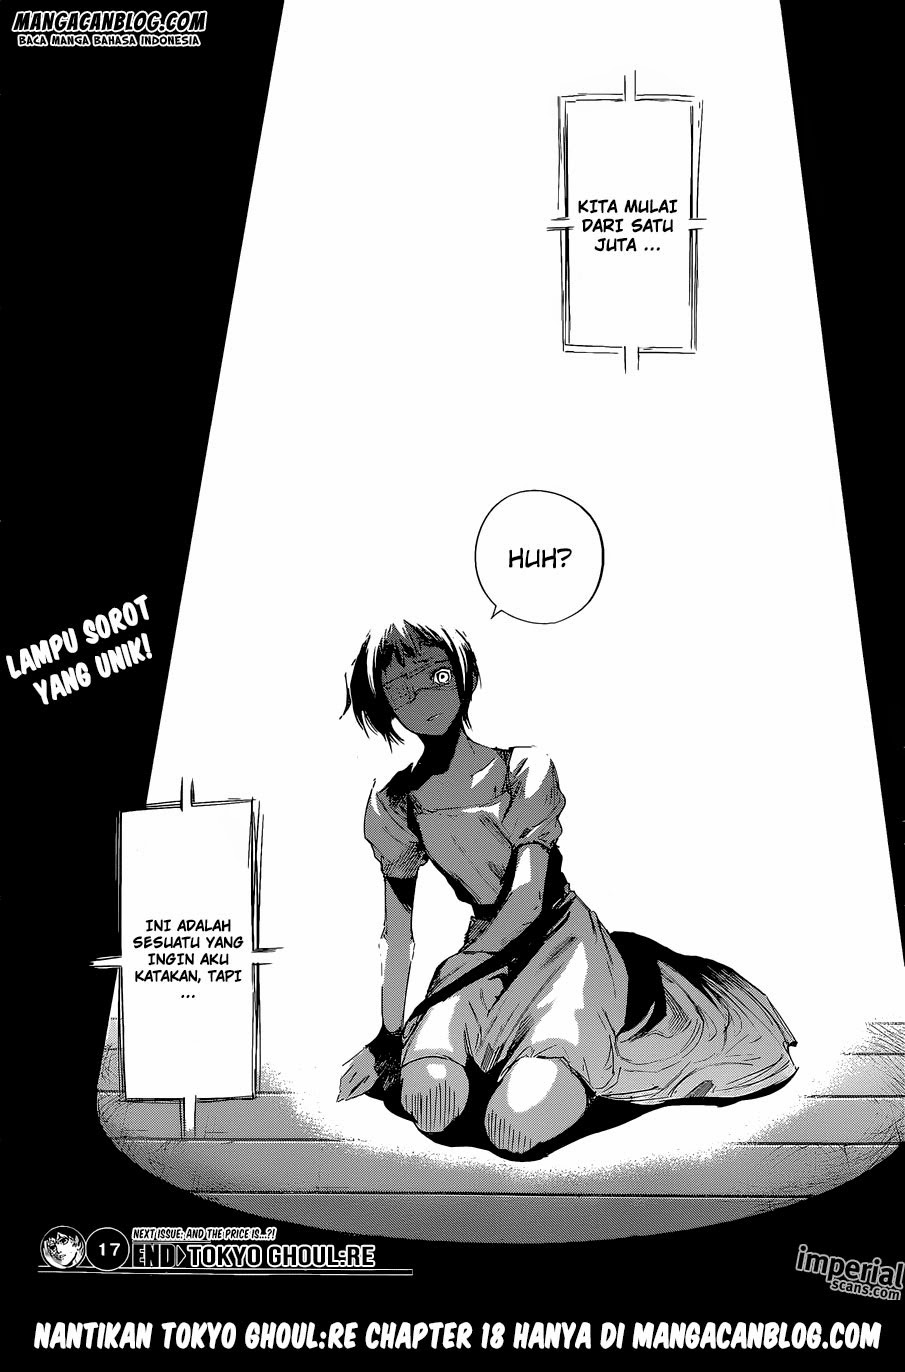 Tokyo Ghoul:re Chapter 17